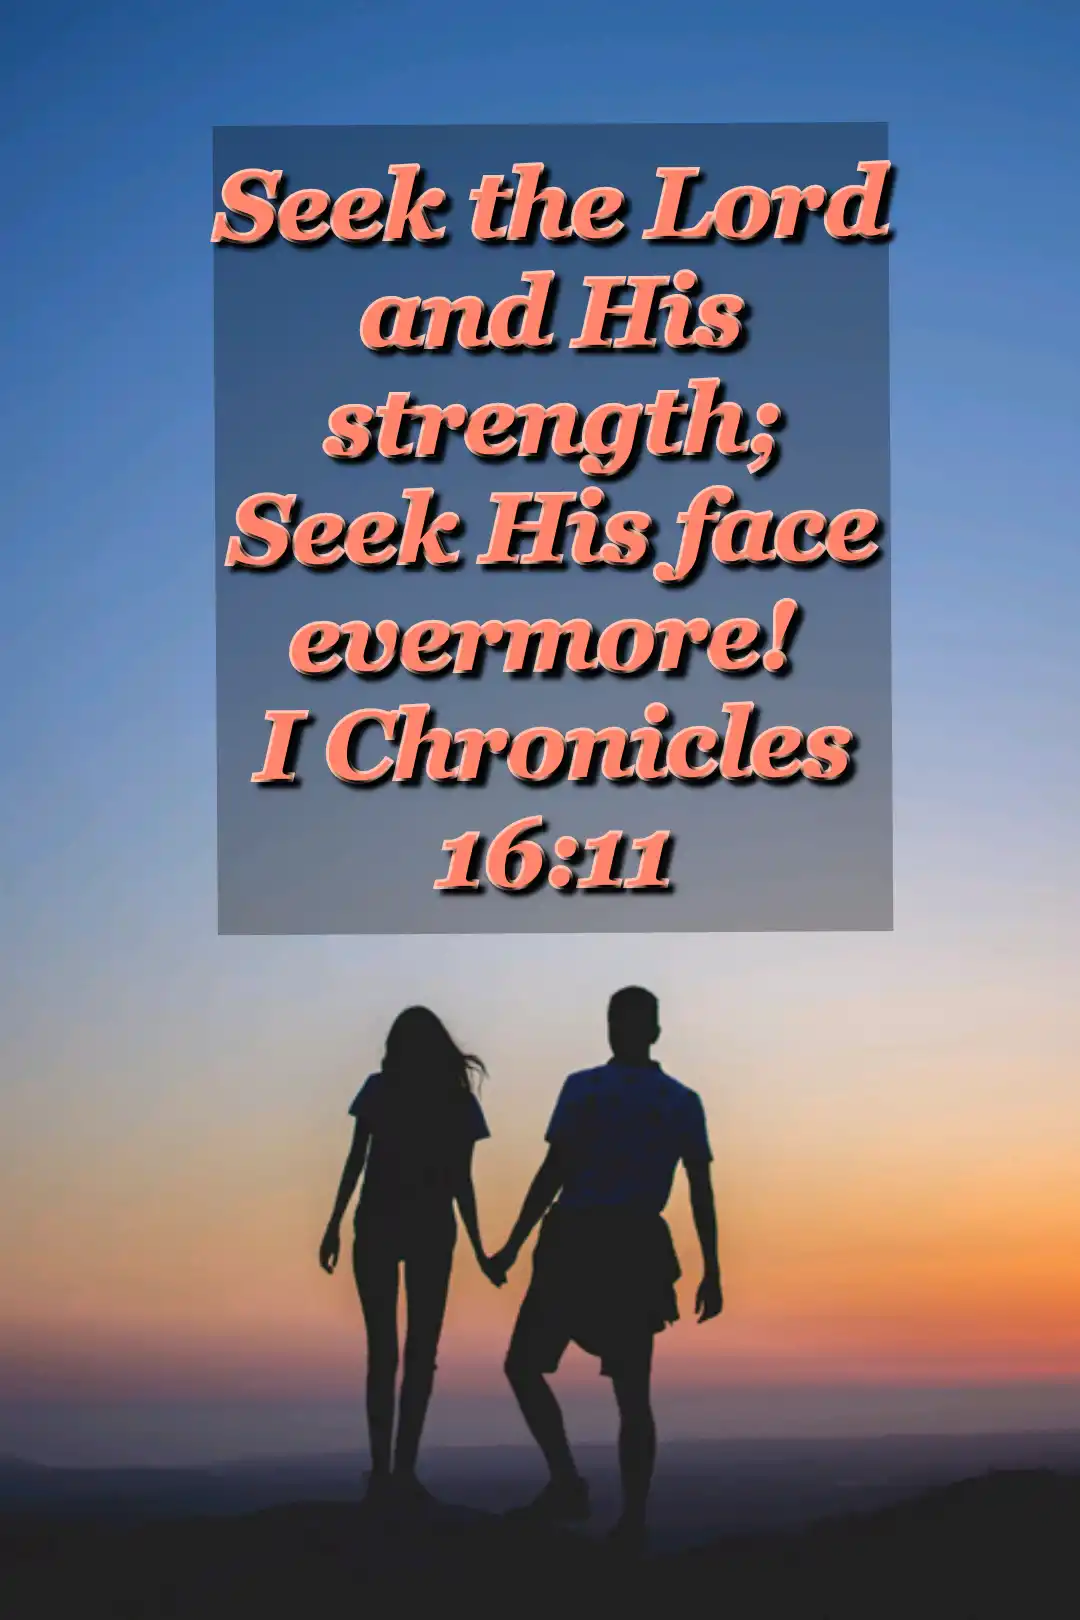 Bible-Verses-about-strength (1 Chronicles 16:11)